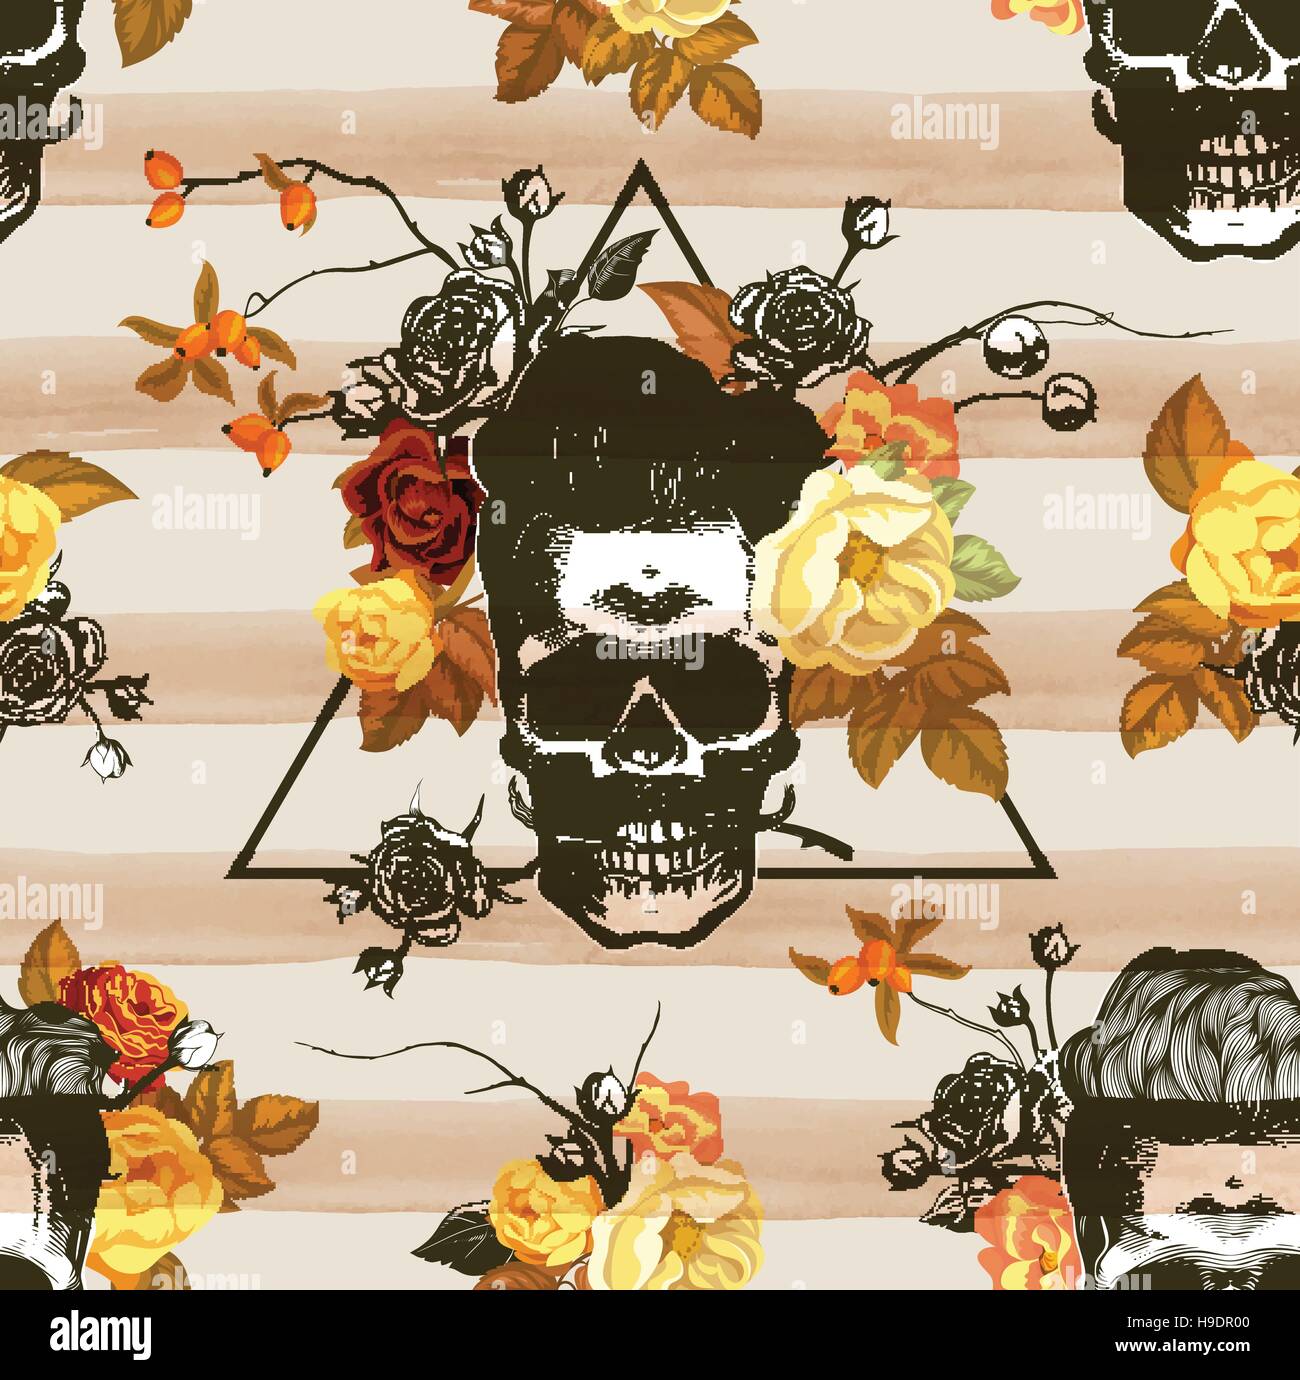 Autumn mood. Hipster seamless pattern with the skulls, autumn flowers and leaves in the background. Skull silhouette in engraving style. Vector. Stock Vector